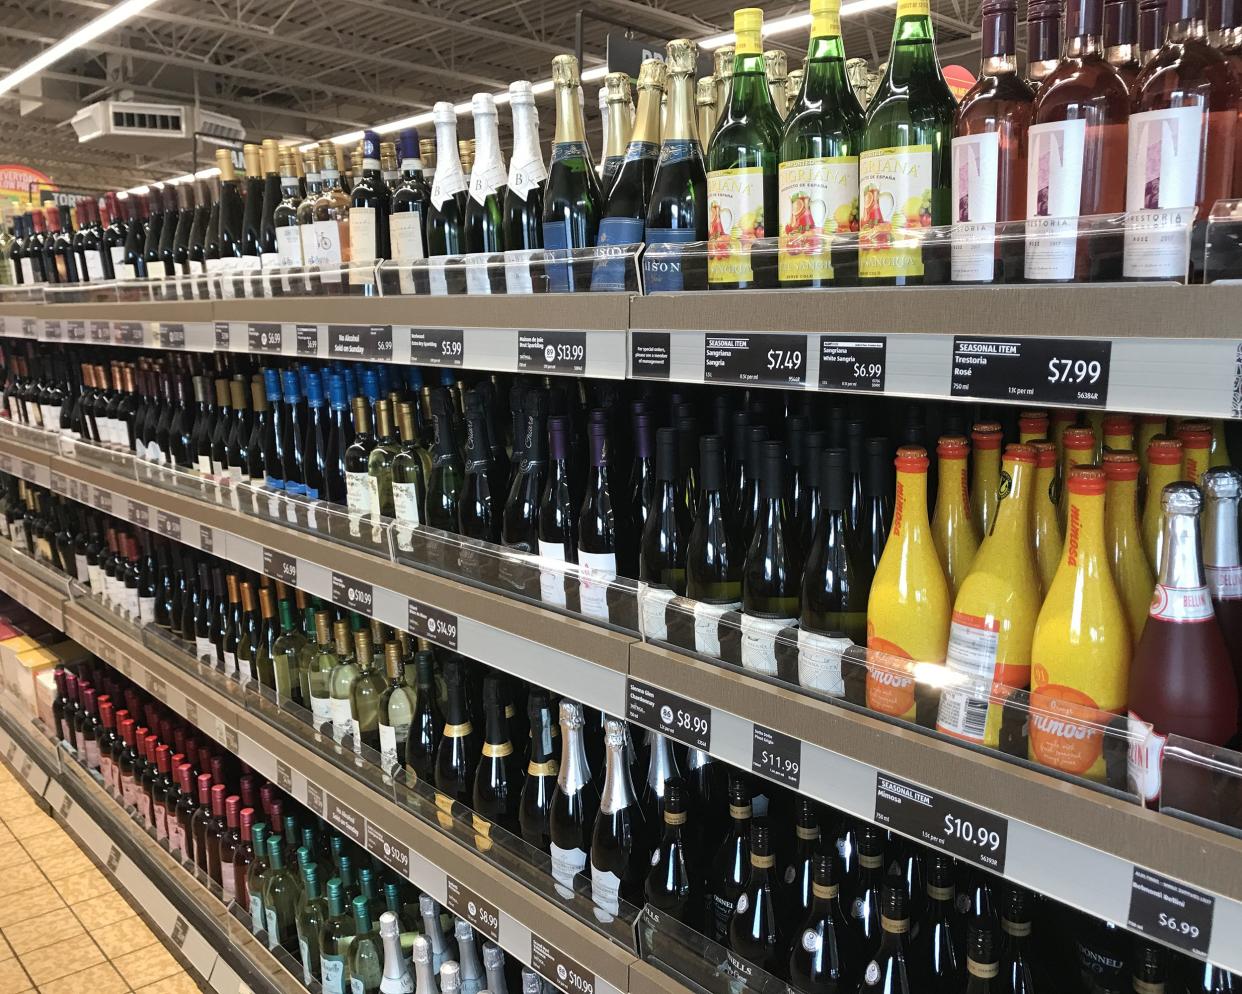 One side of an aisle 4 rows of wine and champagnes in an Aldi store, organized with descriptions and prices underneath, tile floor on the bottom left side